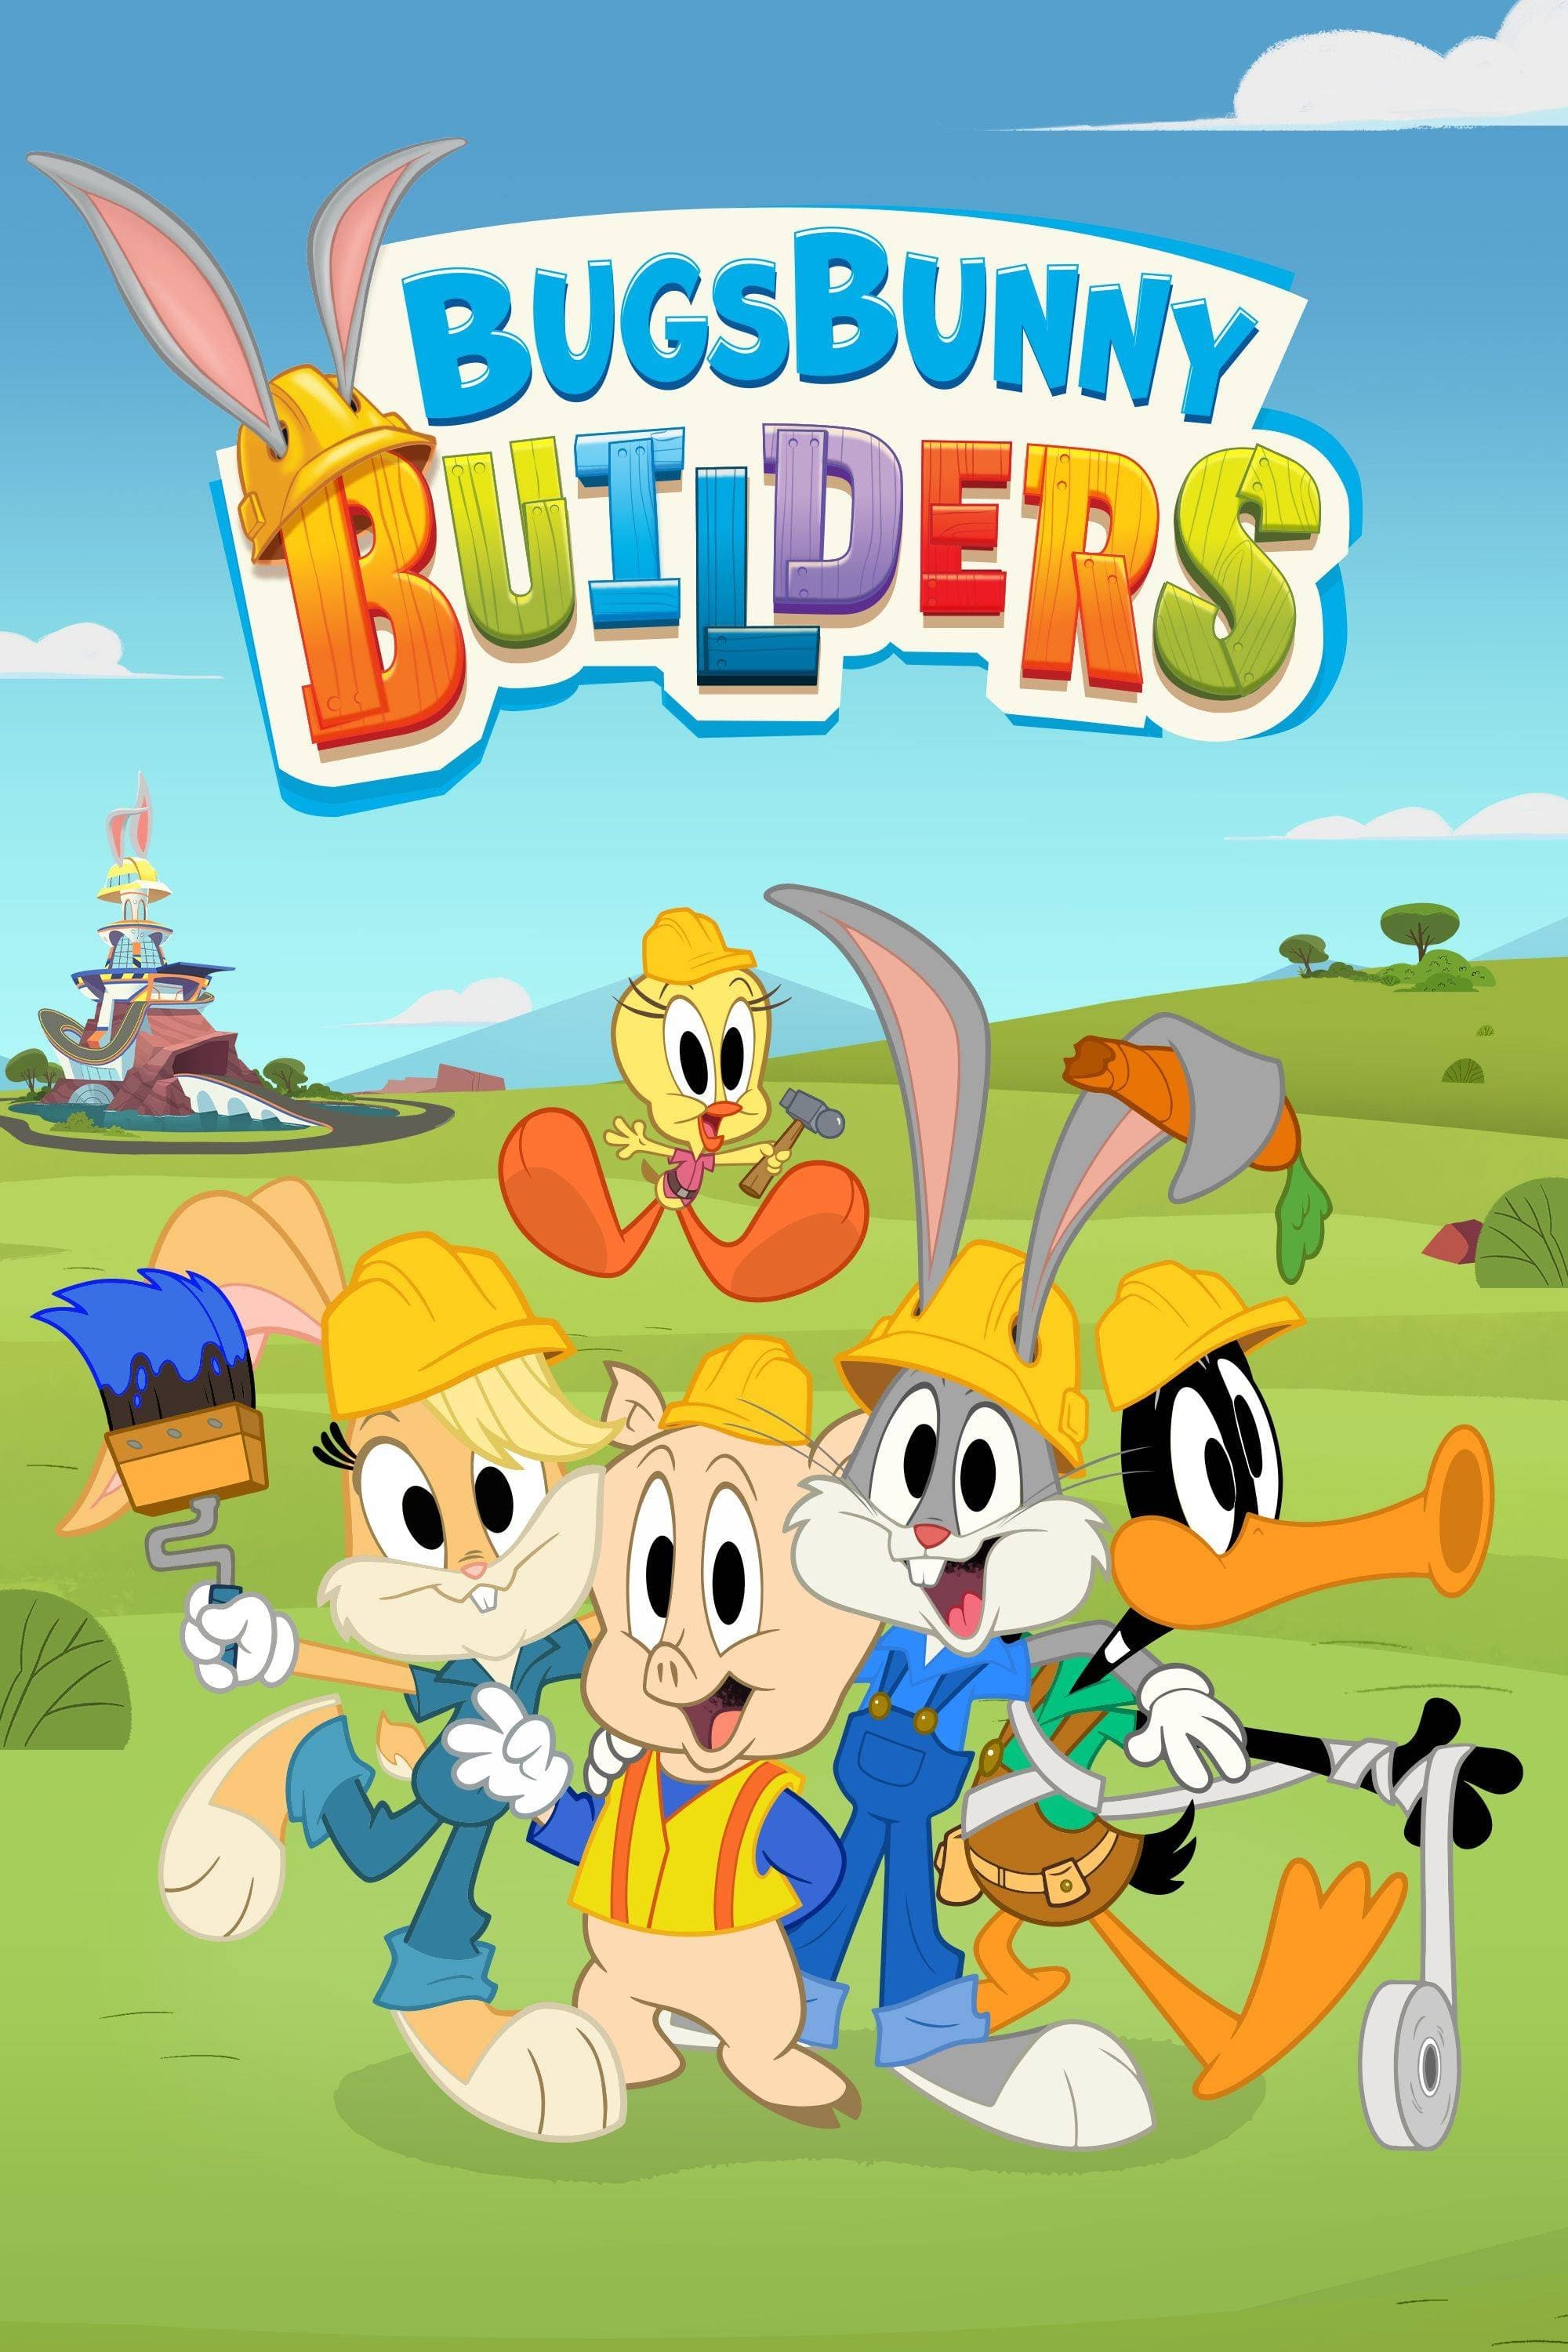 Bugs Bunny Builders TV Shows About Friends